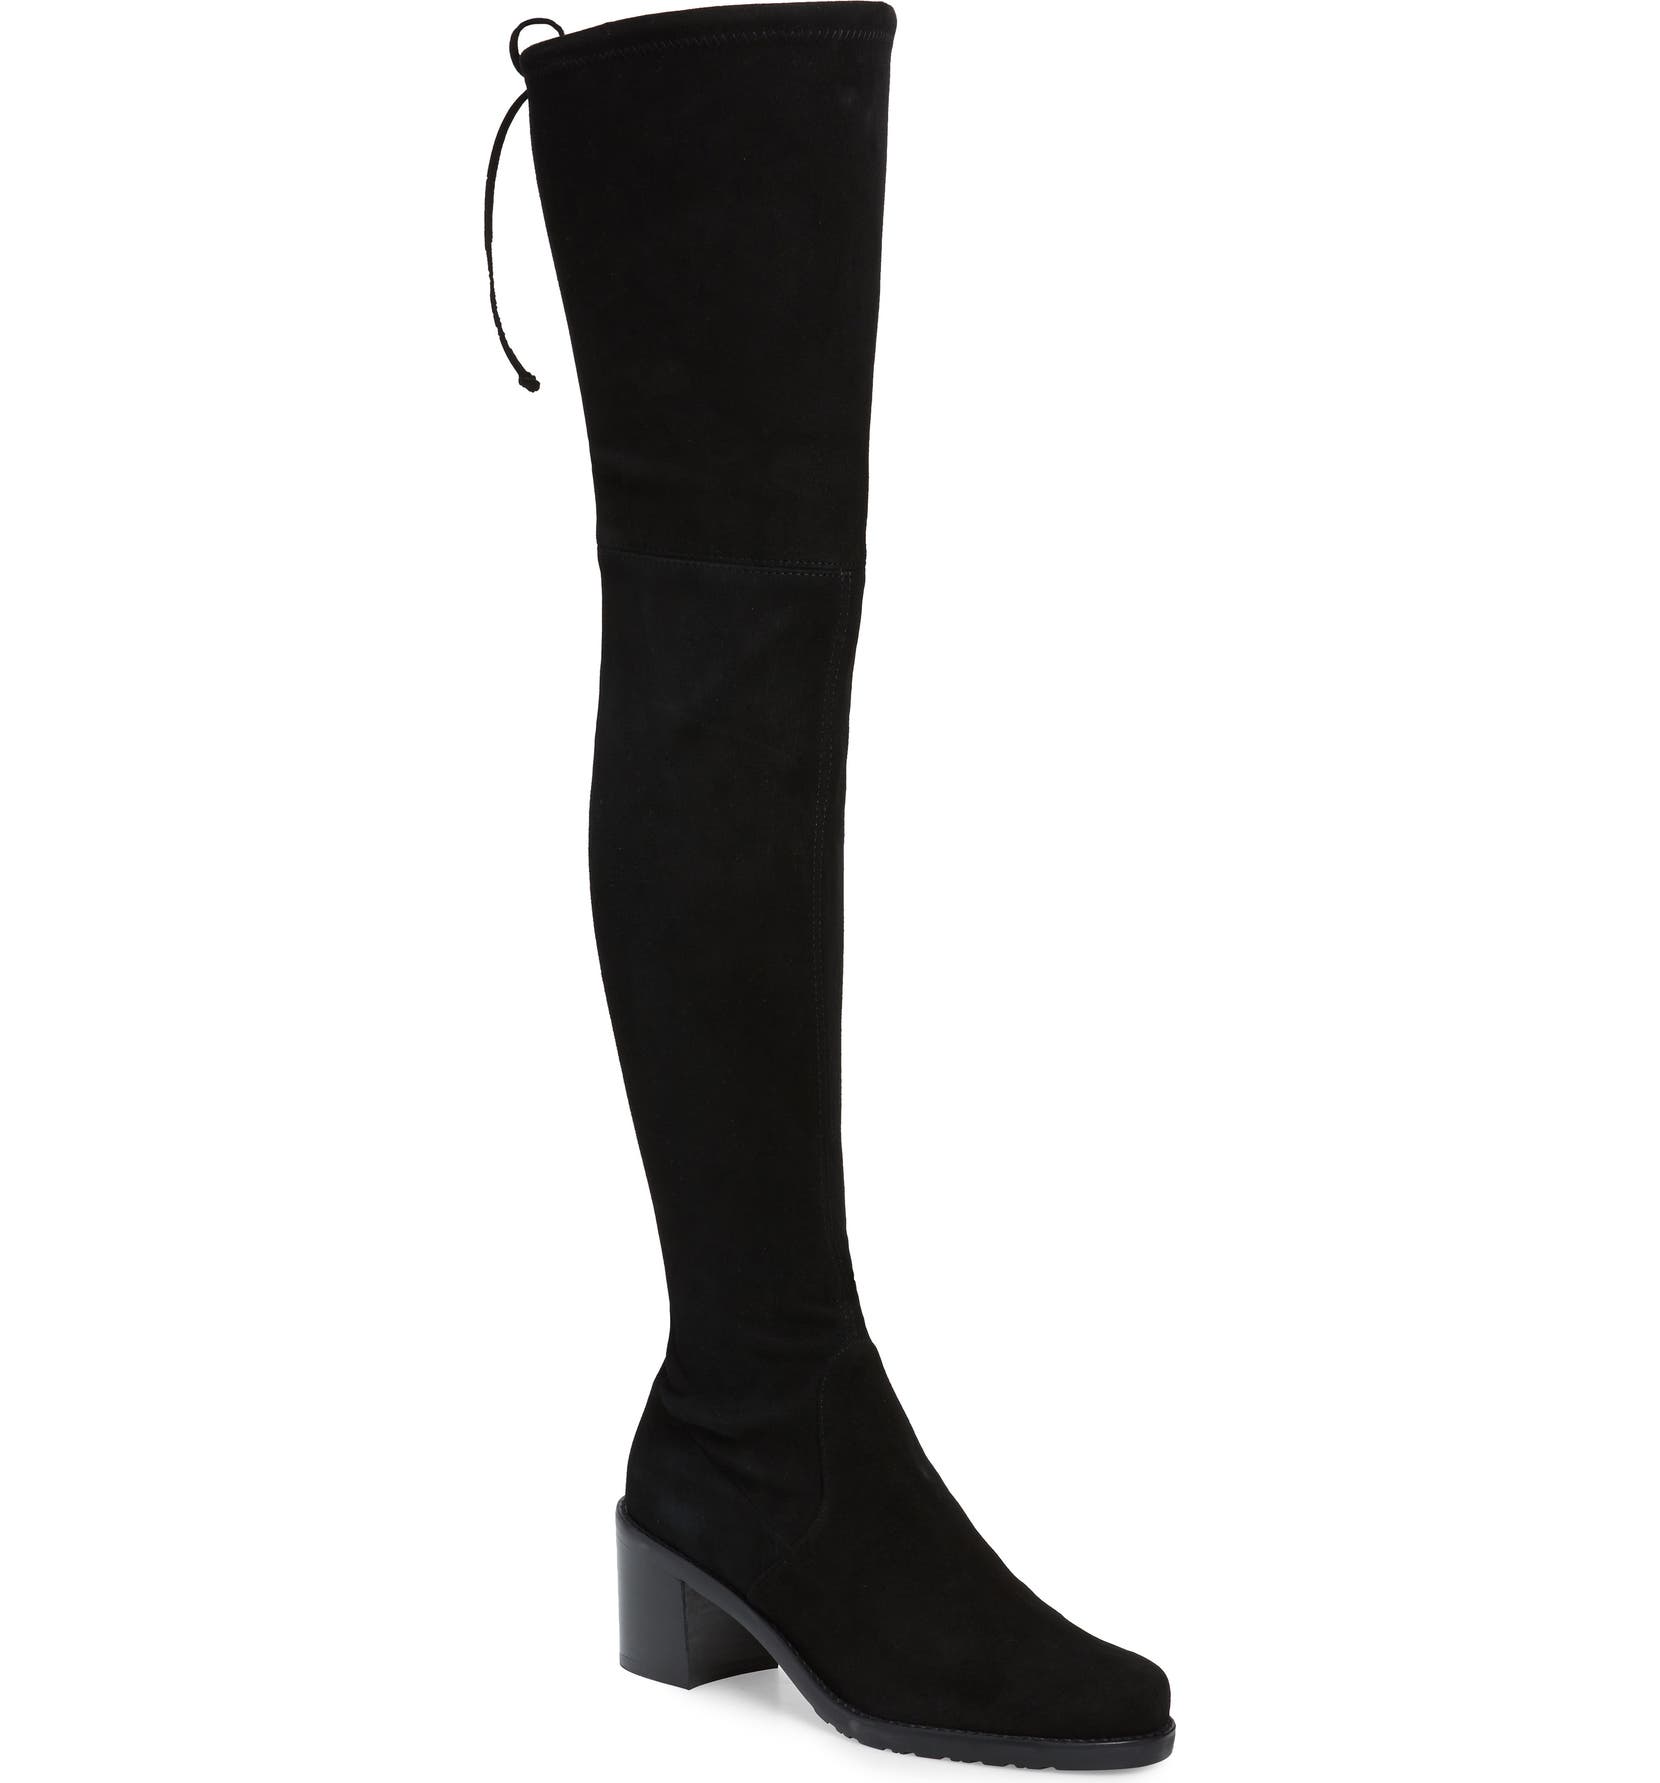  Darla Over the Knee Boot, Main, color, BLACK SUEDE